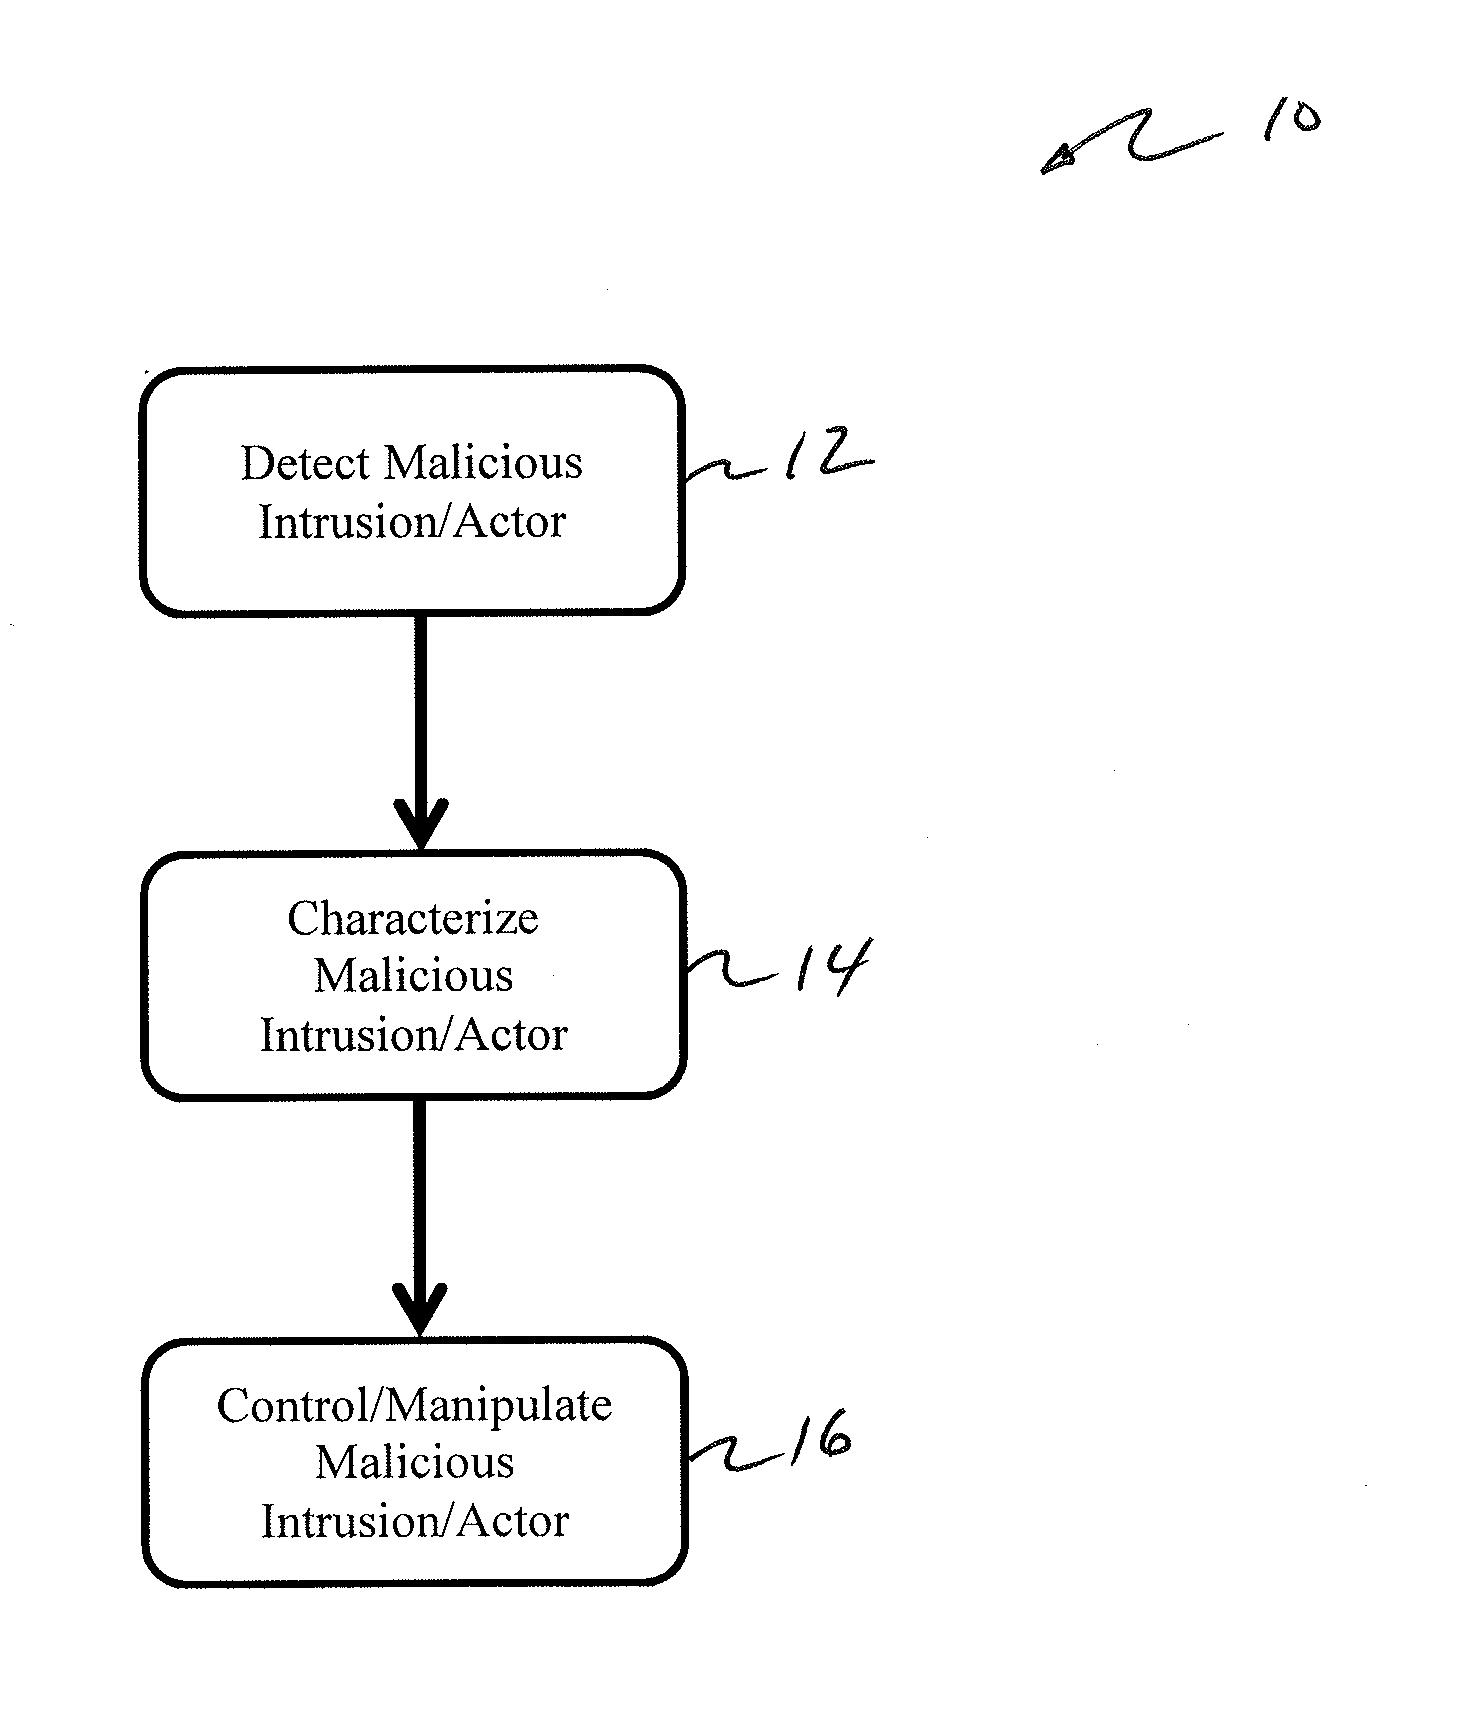 System for detecting, analyzing, and controlling infiltration of computer and network systems